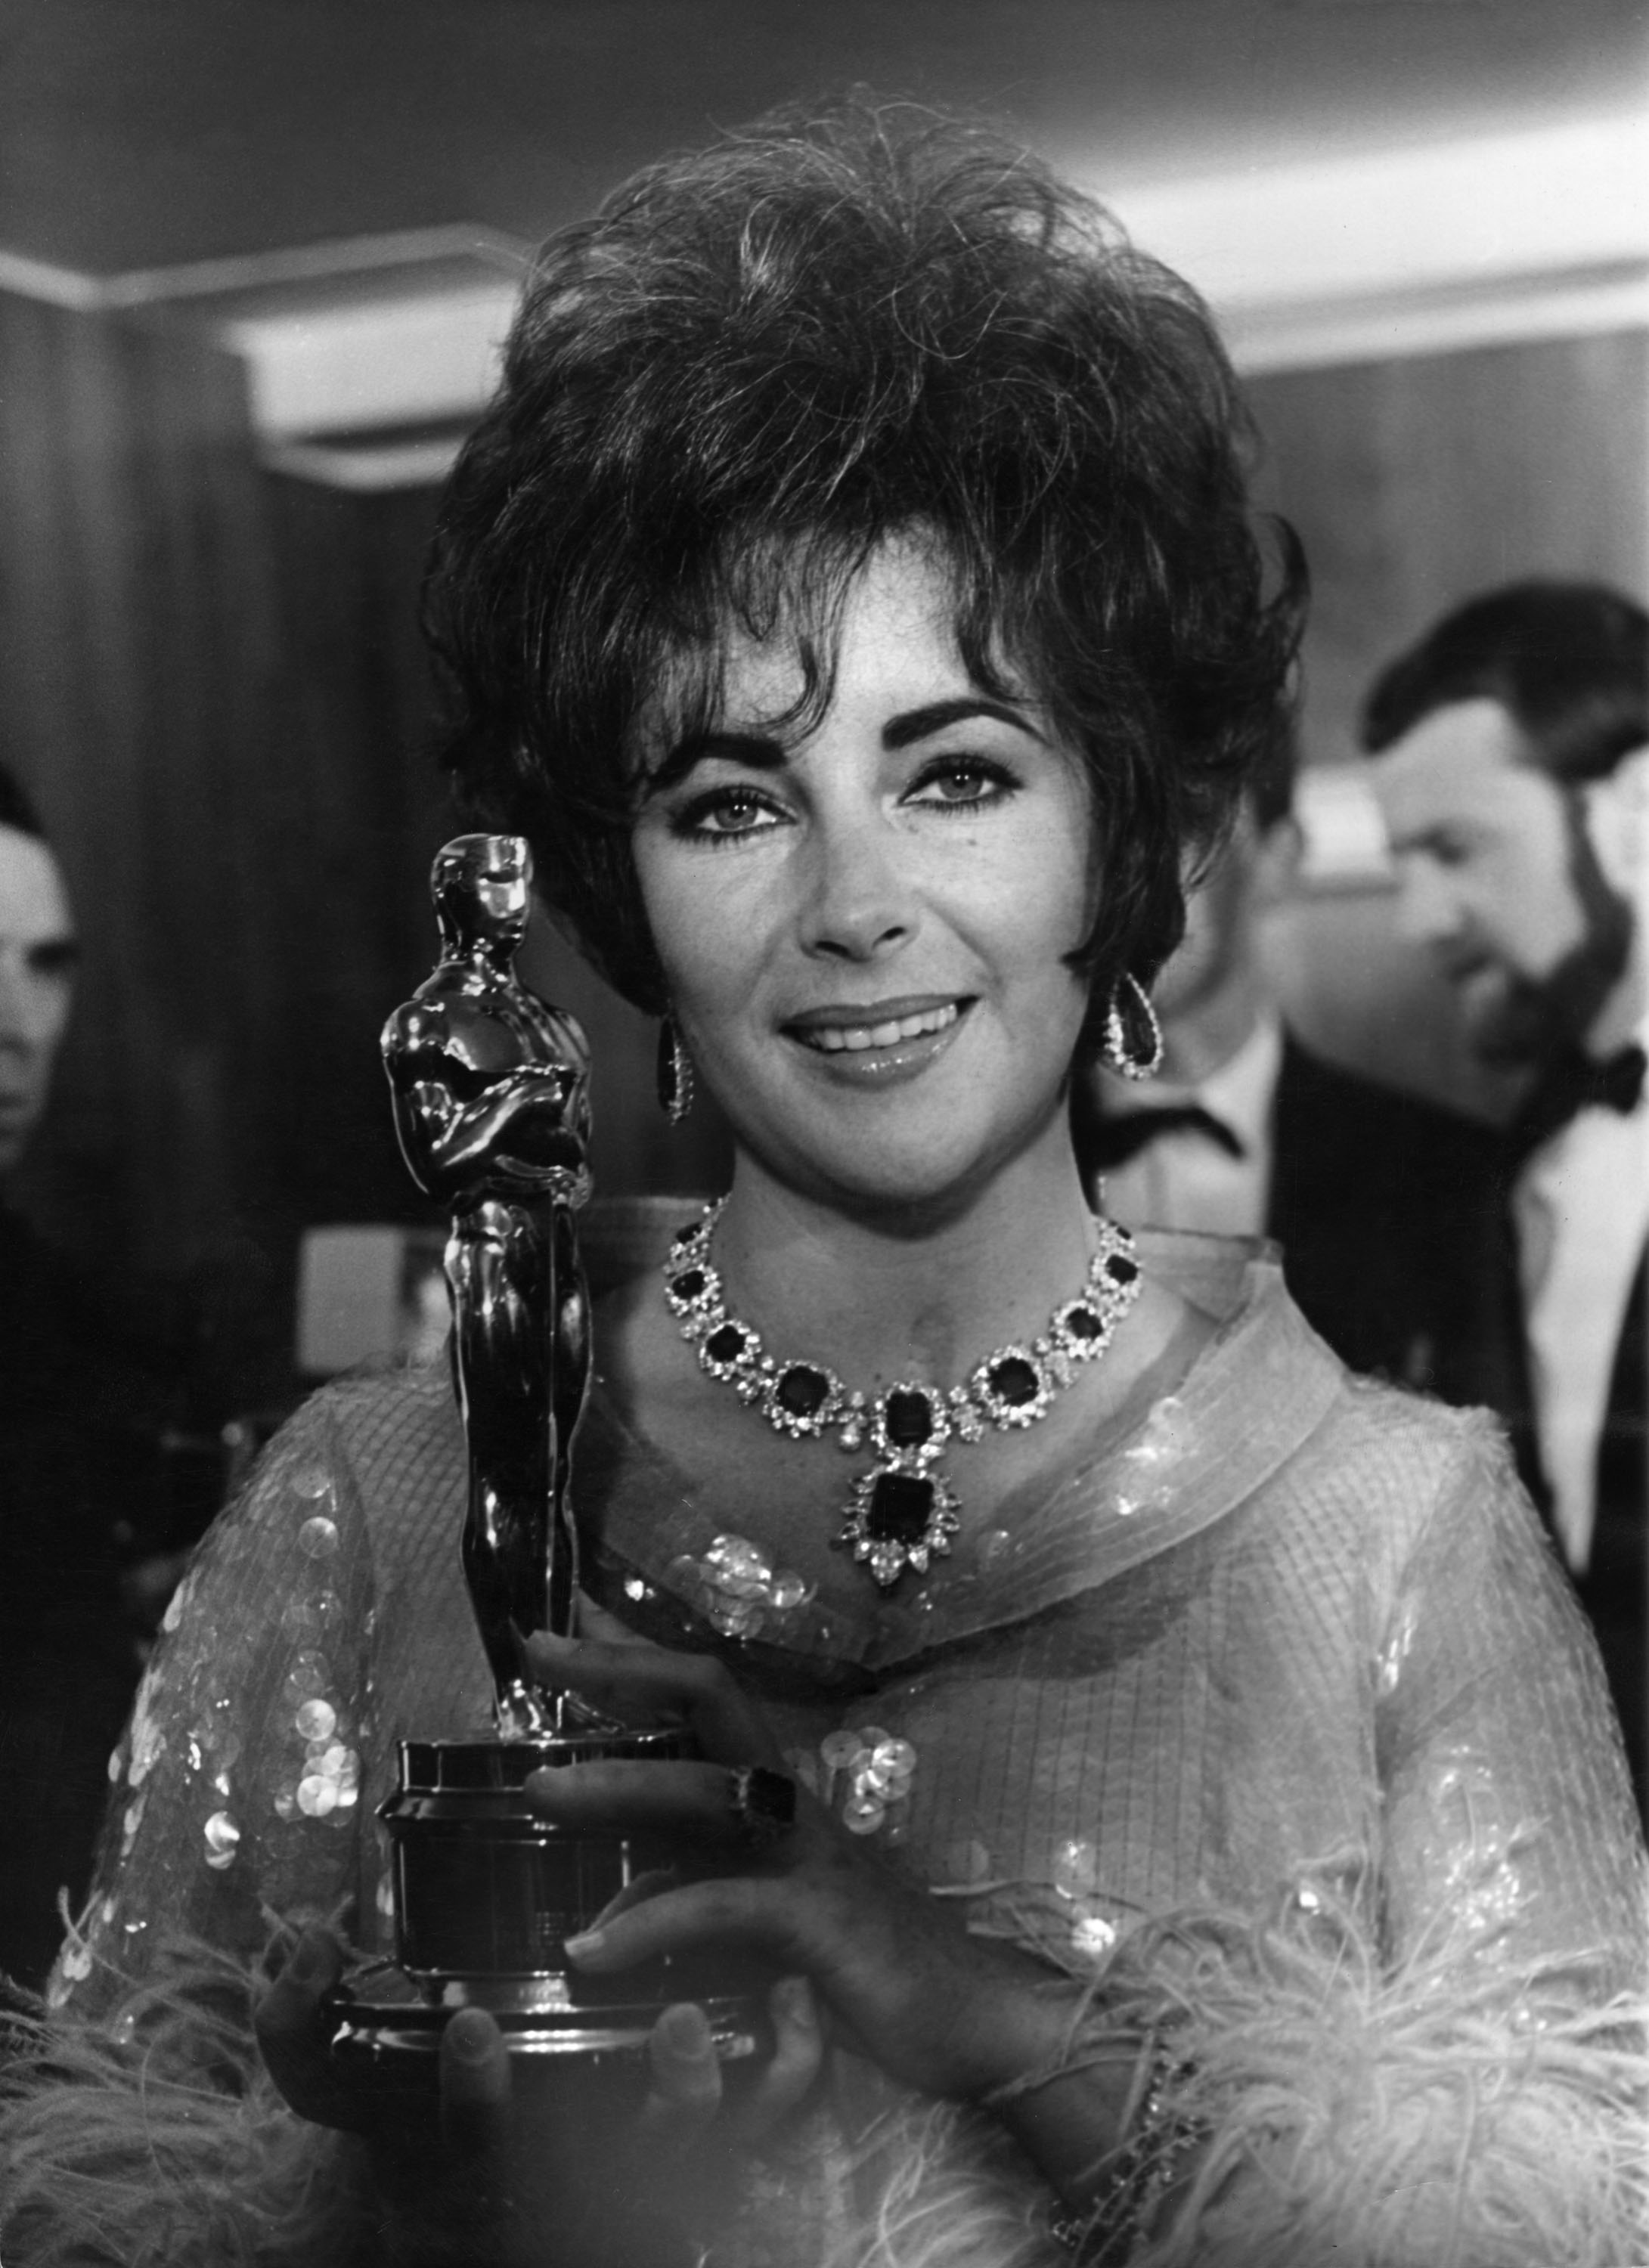 1967 | Oscars.org | Academy of Motion Picture Arts and Sciences